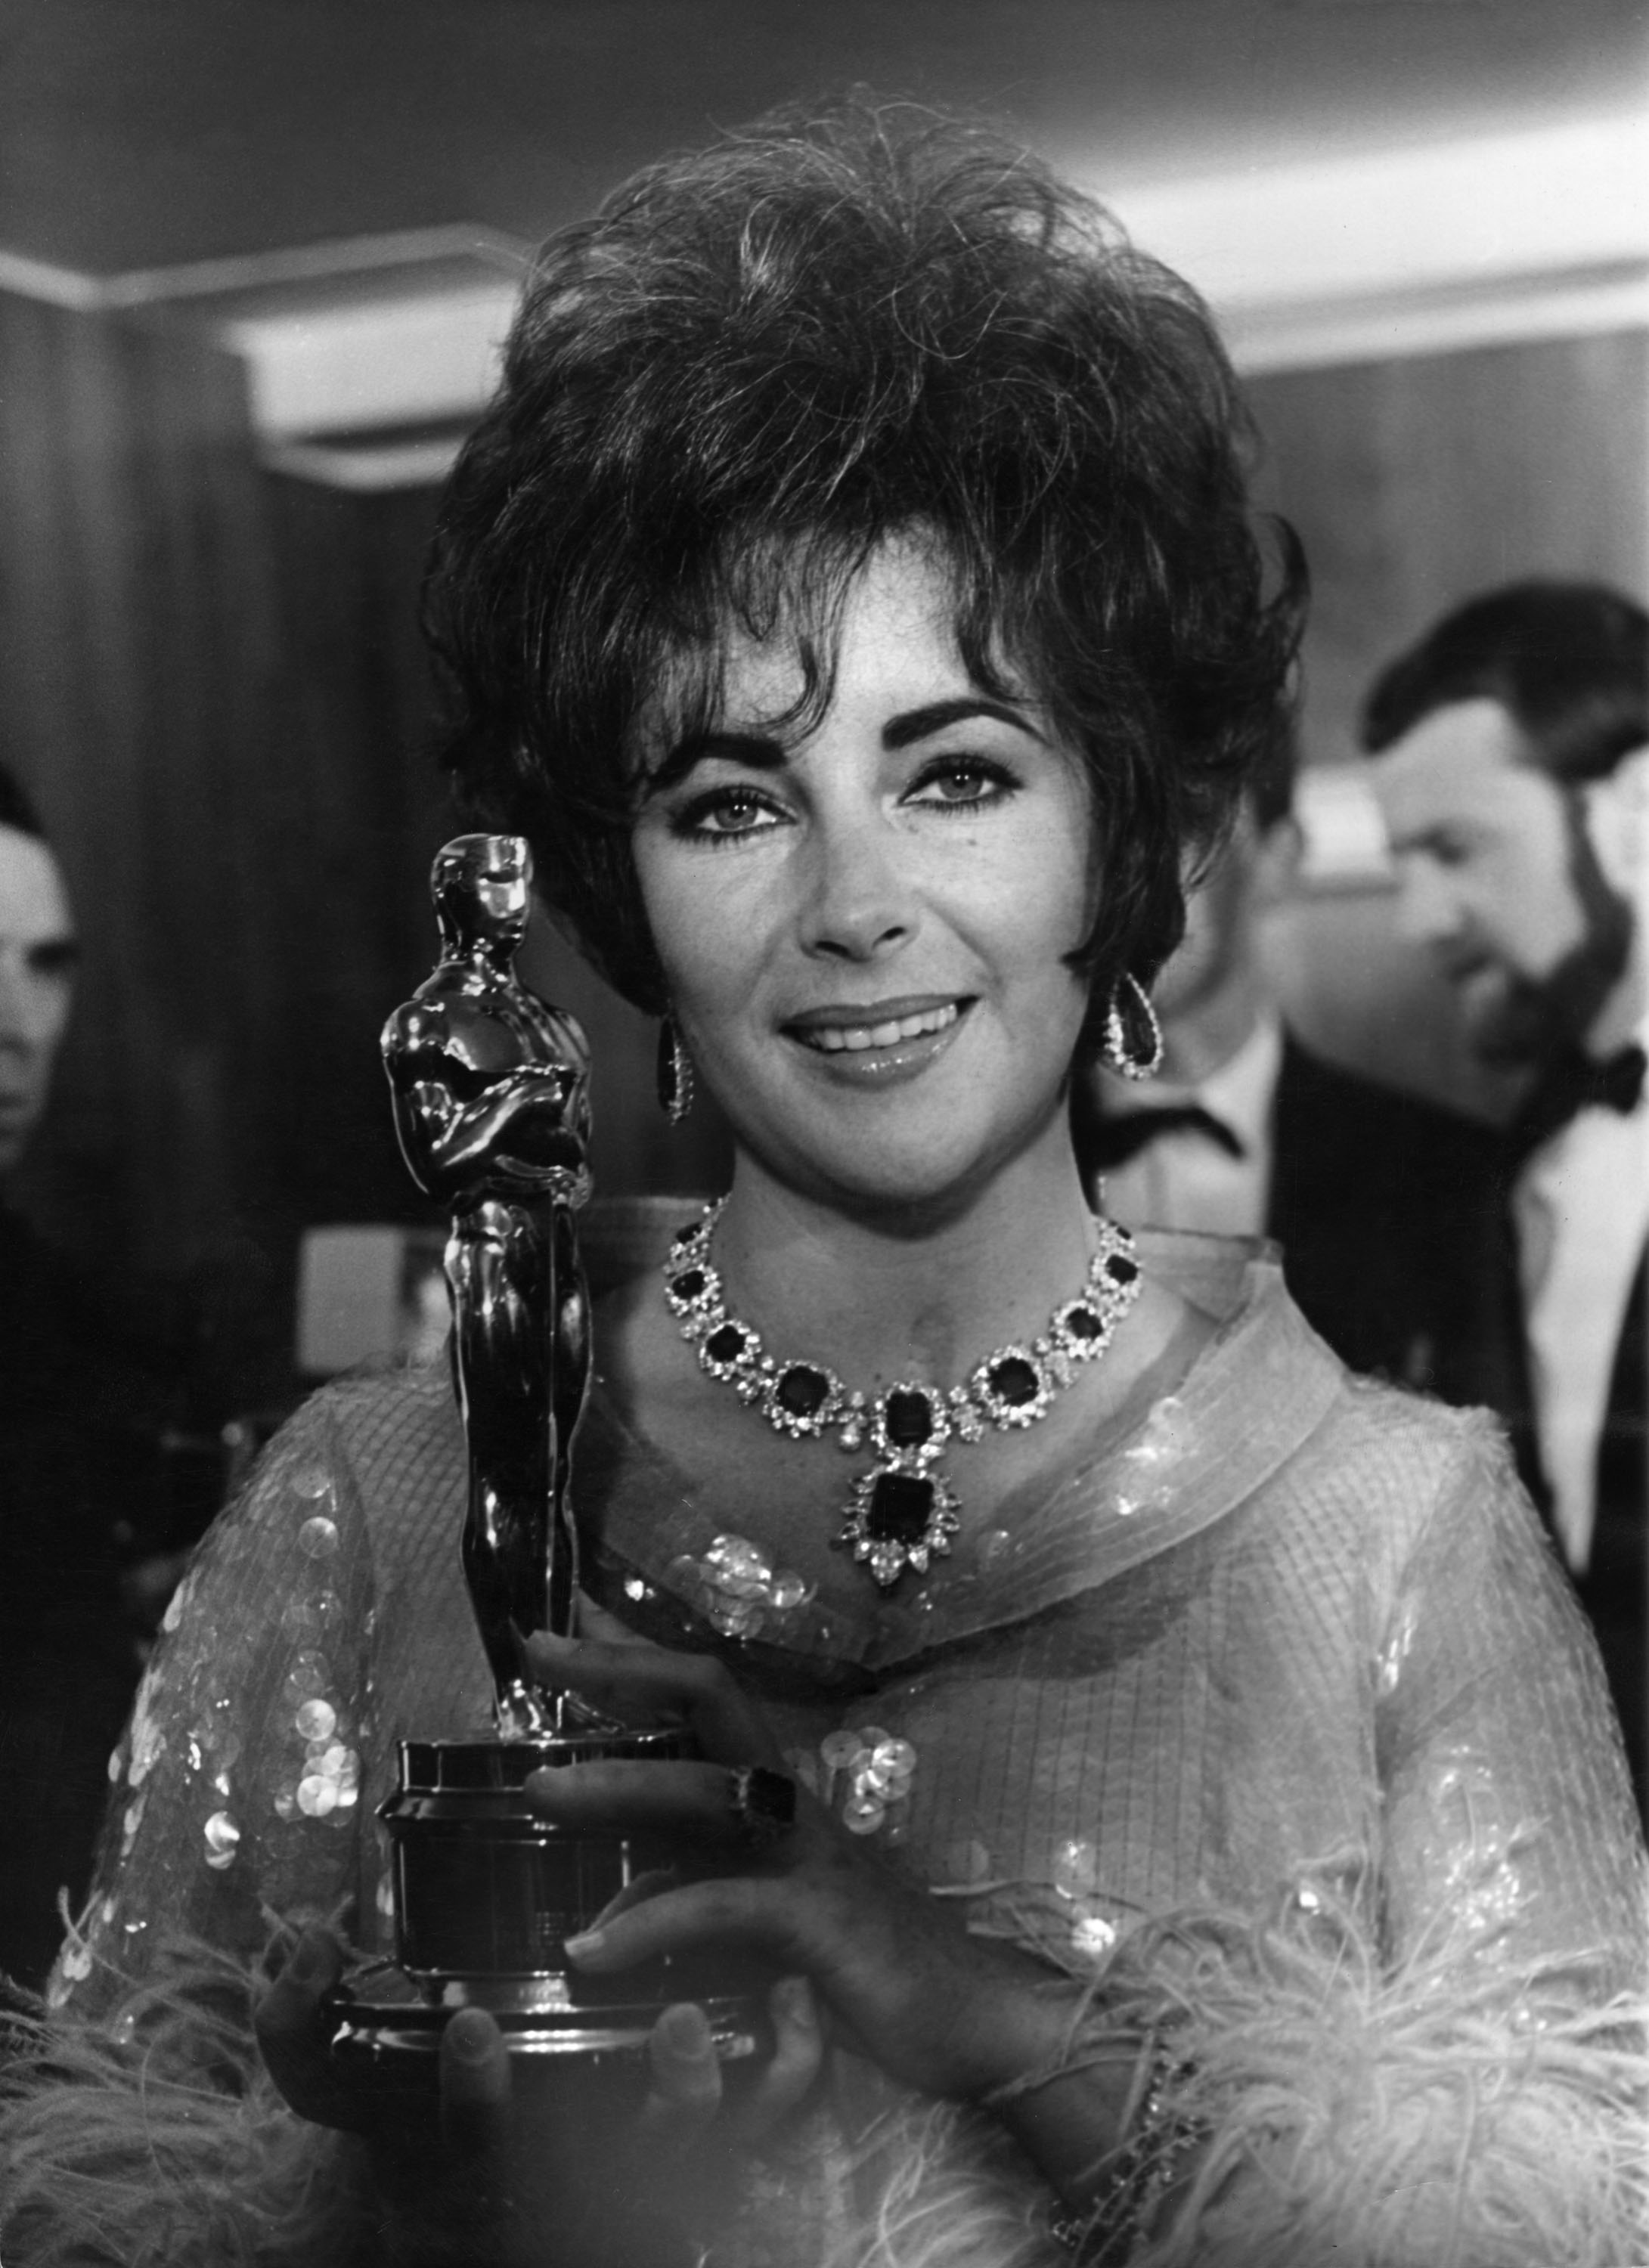 1967 | Oscars.org | Academy of Motion Picture Arts and Sciences